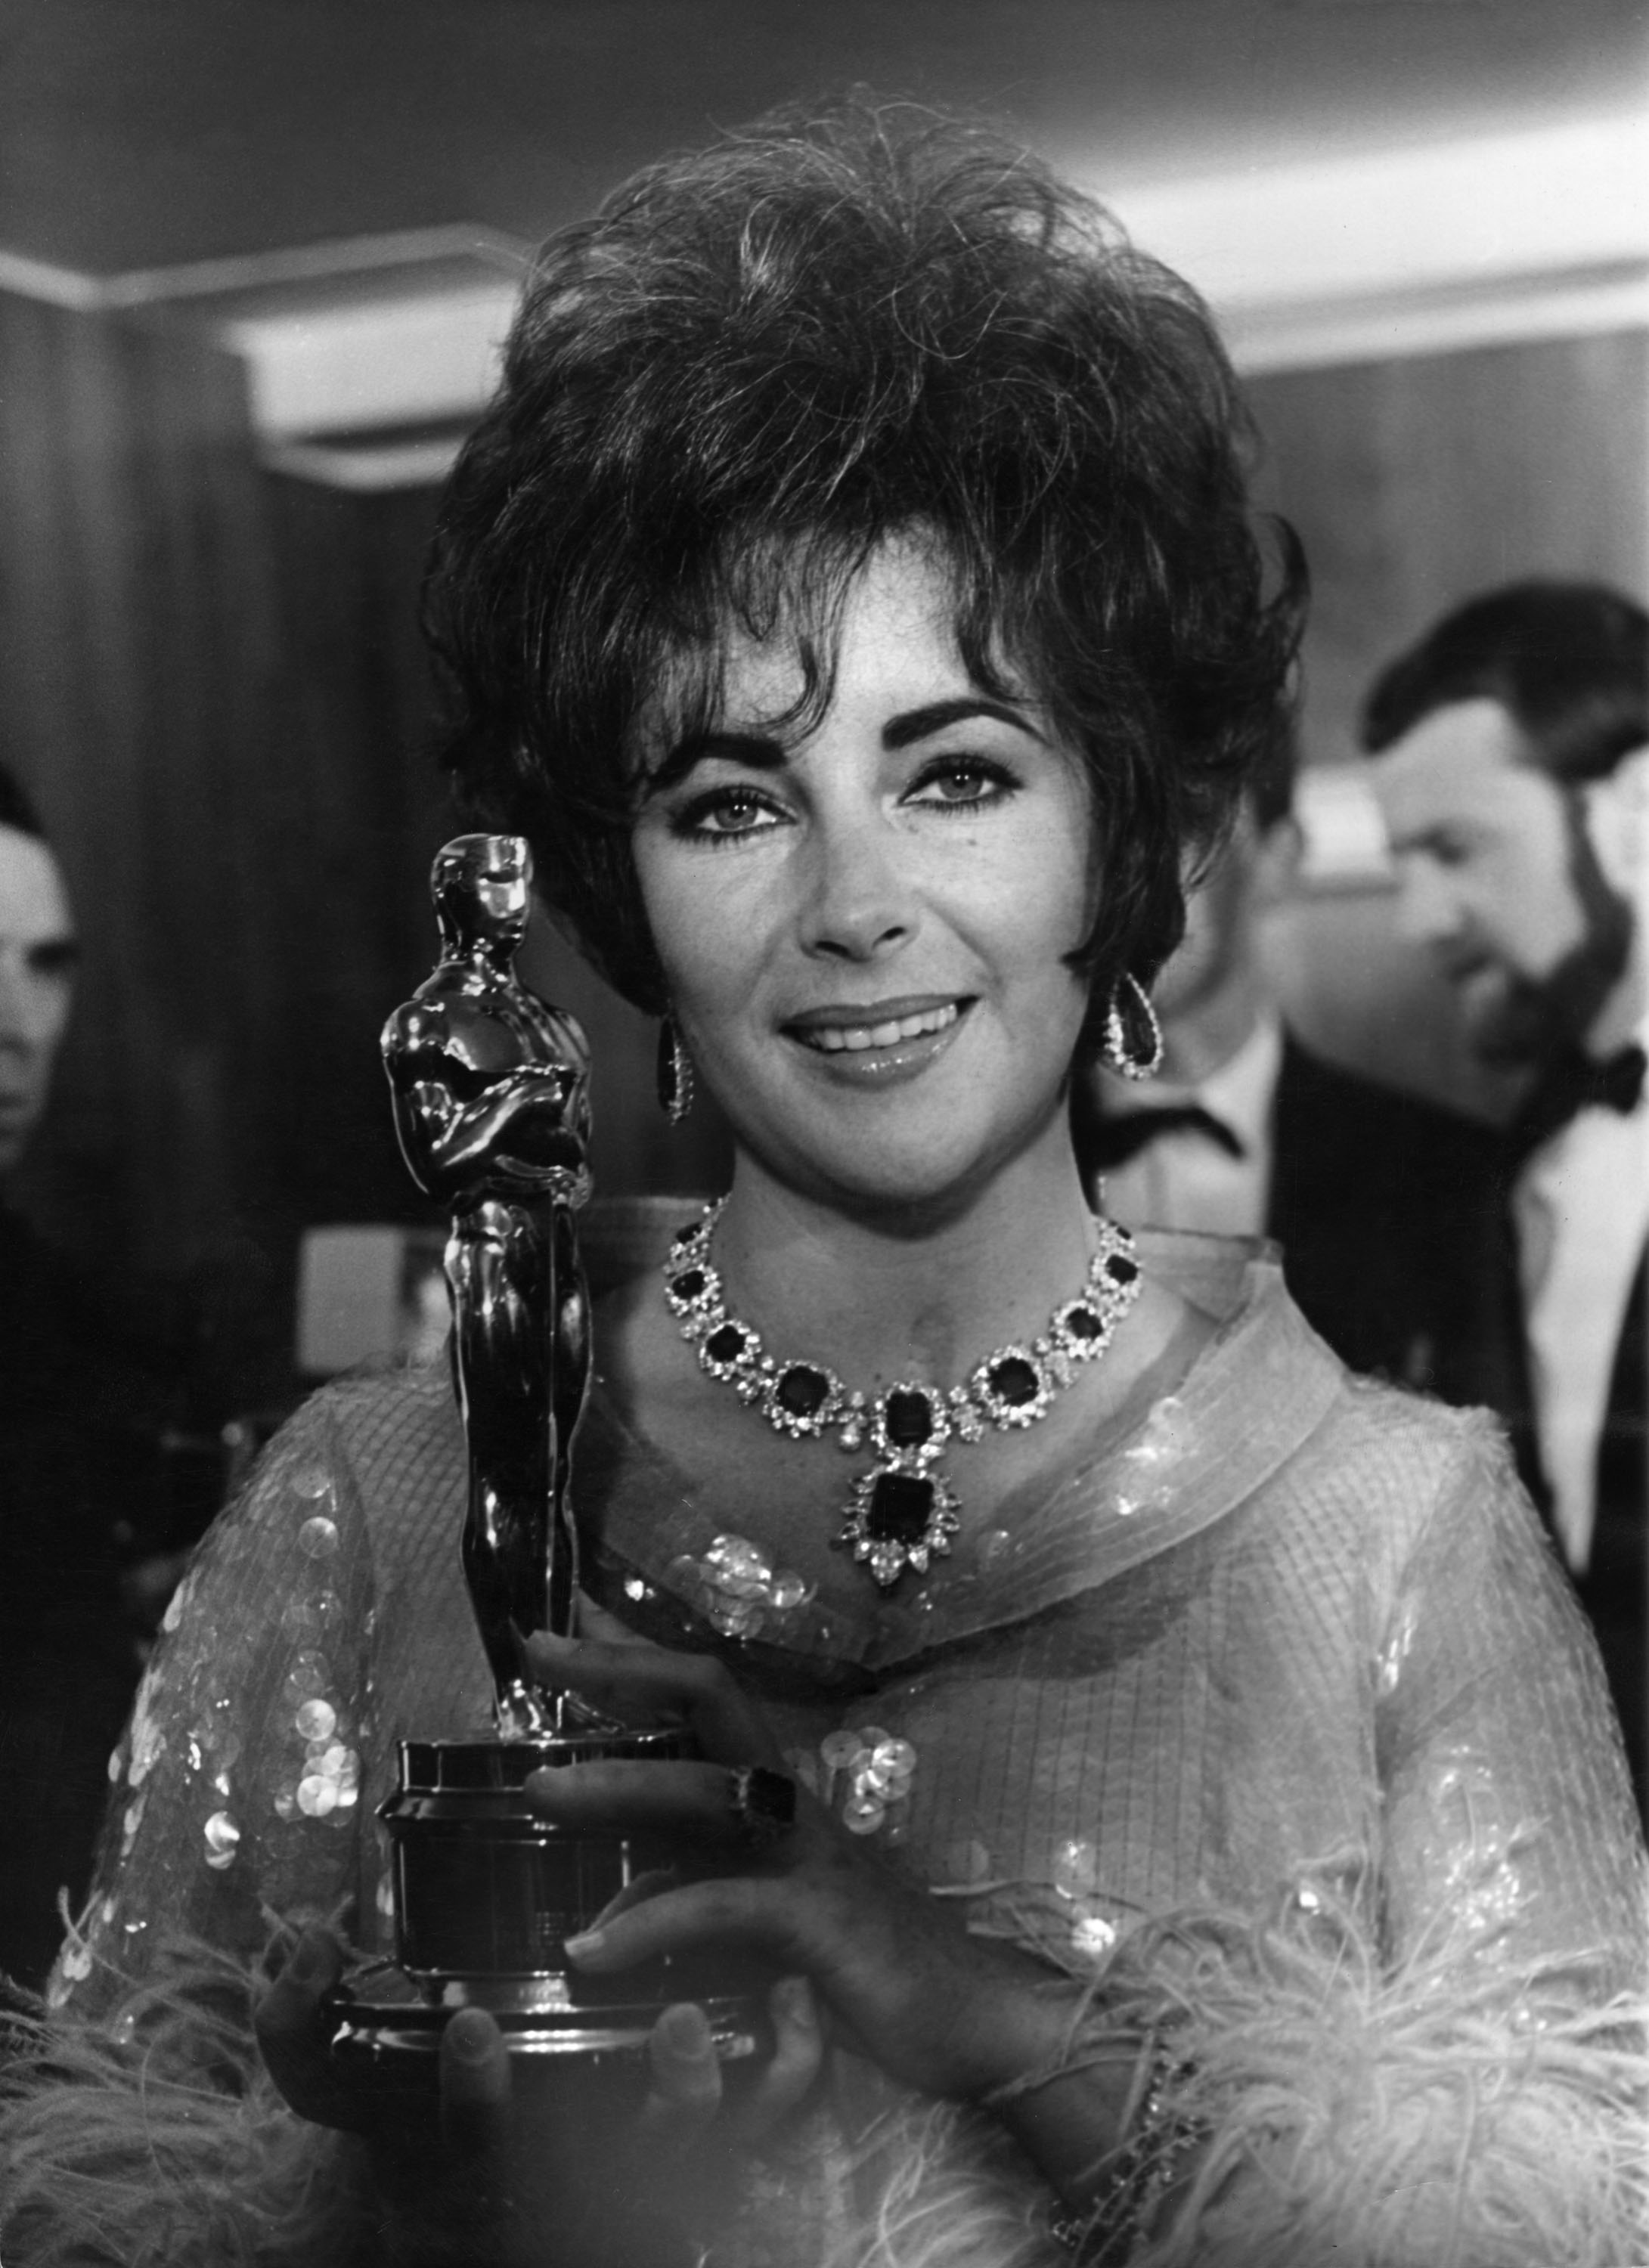 1967 | Oscars.org | Academy of Motion Picture Arts and Sciences